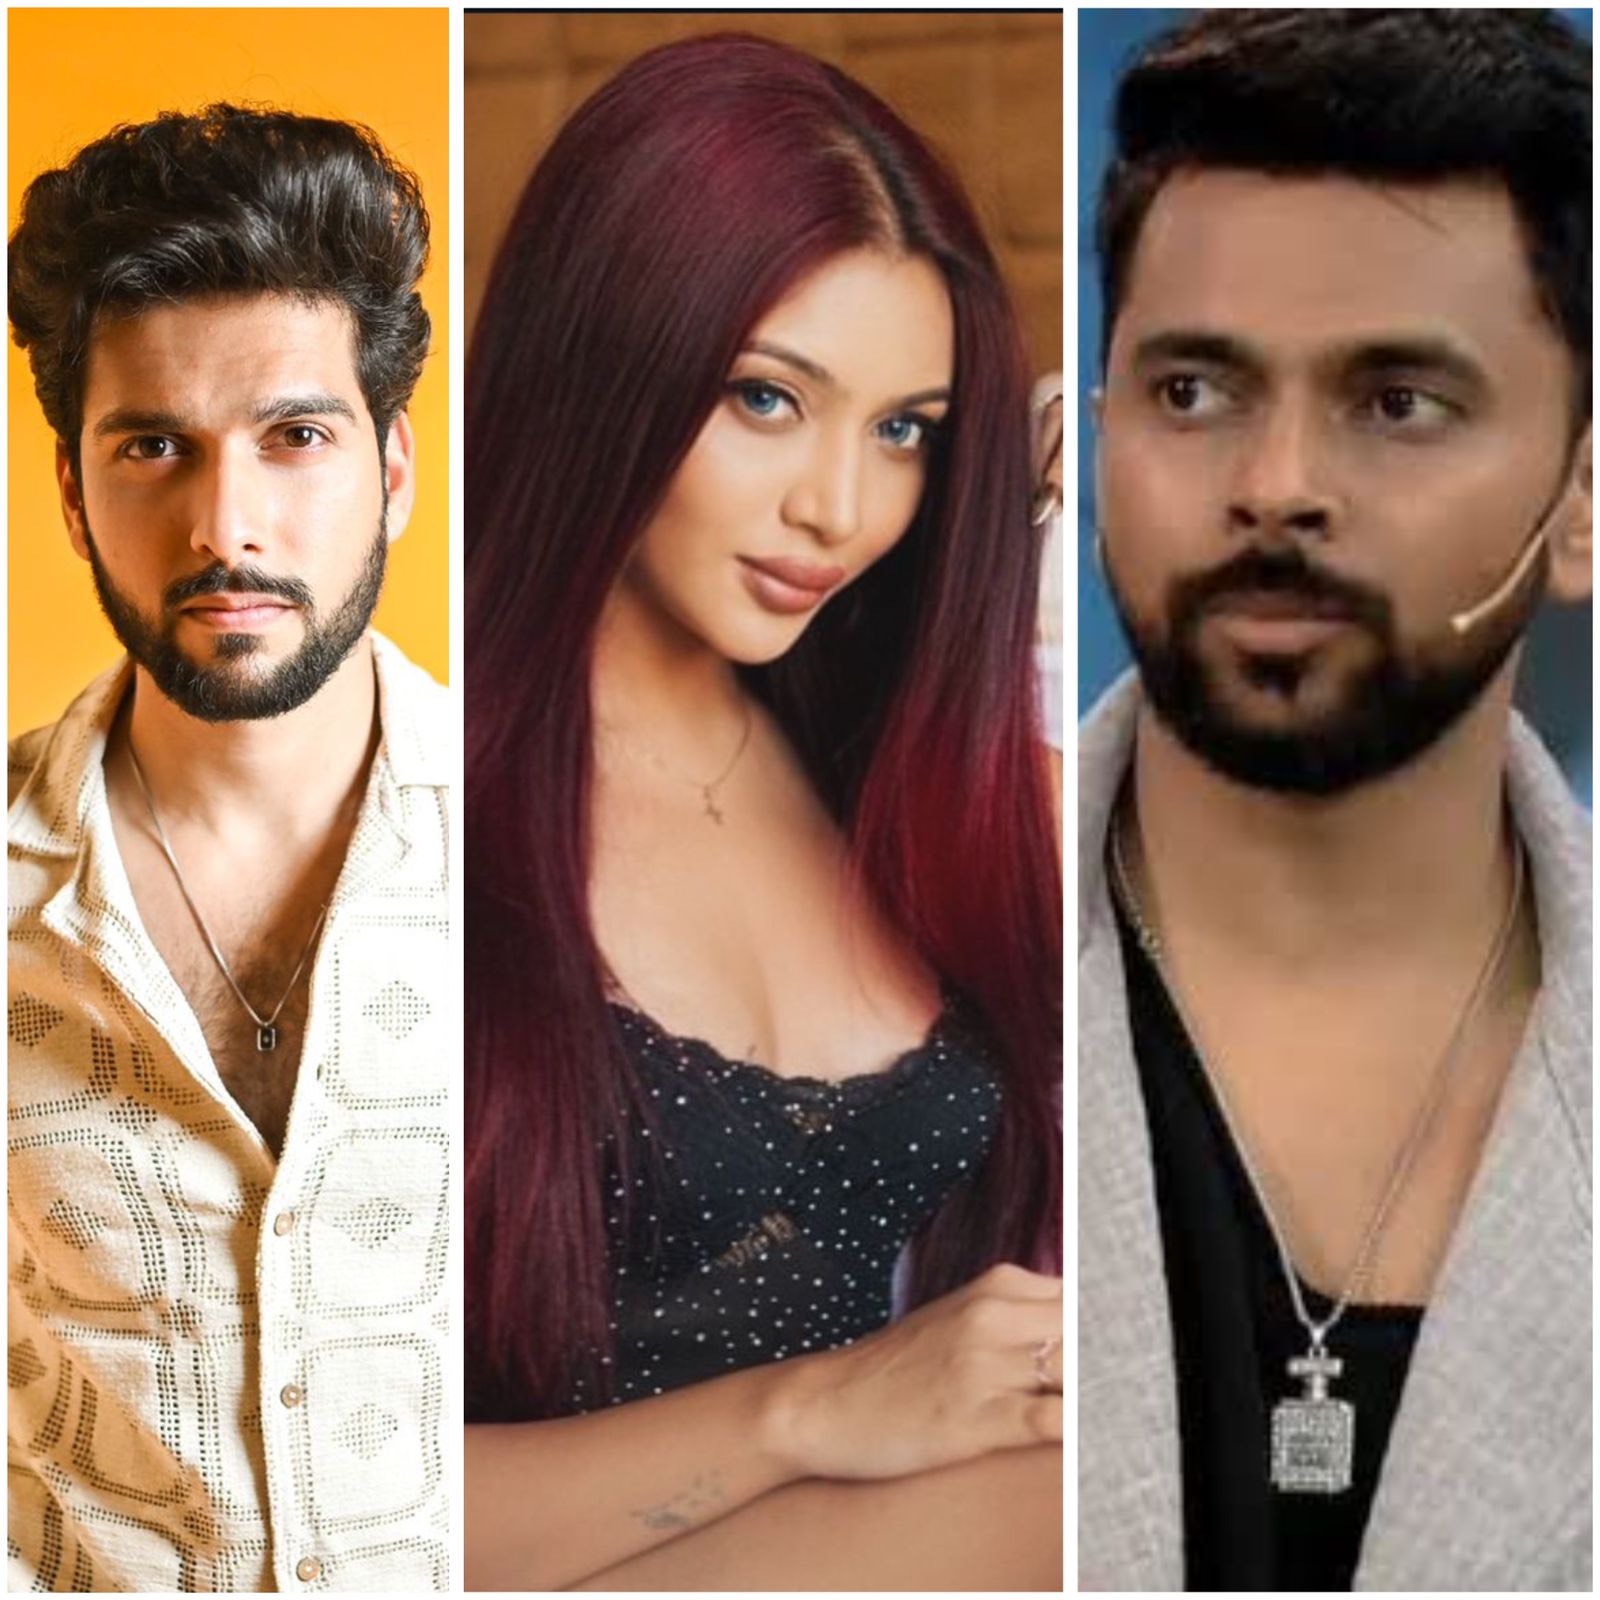 Bekaboo 3 fame Nikkita Ghag talks about her Favourite Bigg boss Ott 3 contestant, says , “My favorite contestant is Sai Ketan Rao, he is a complete package”